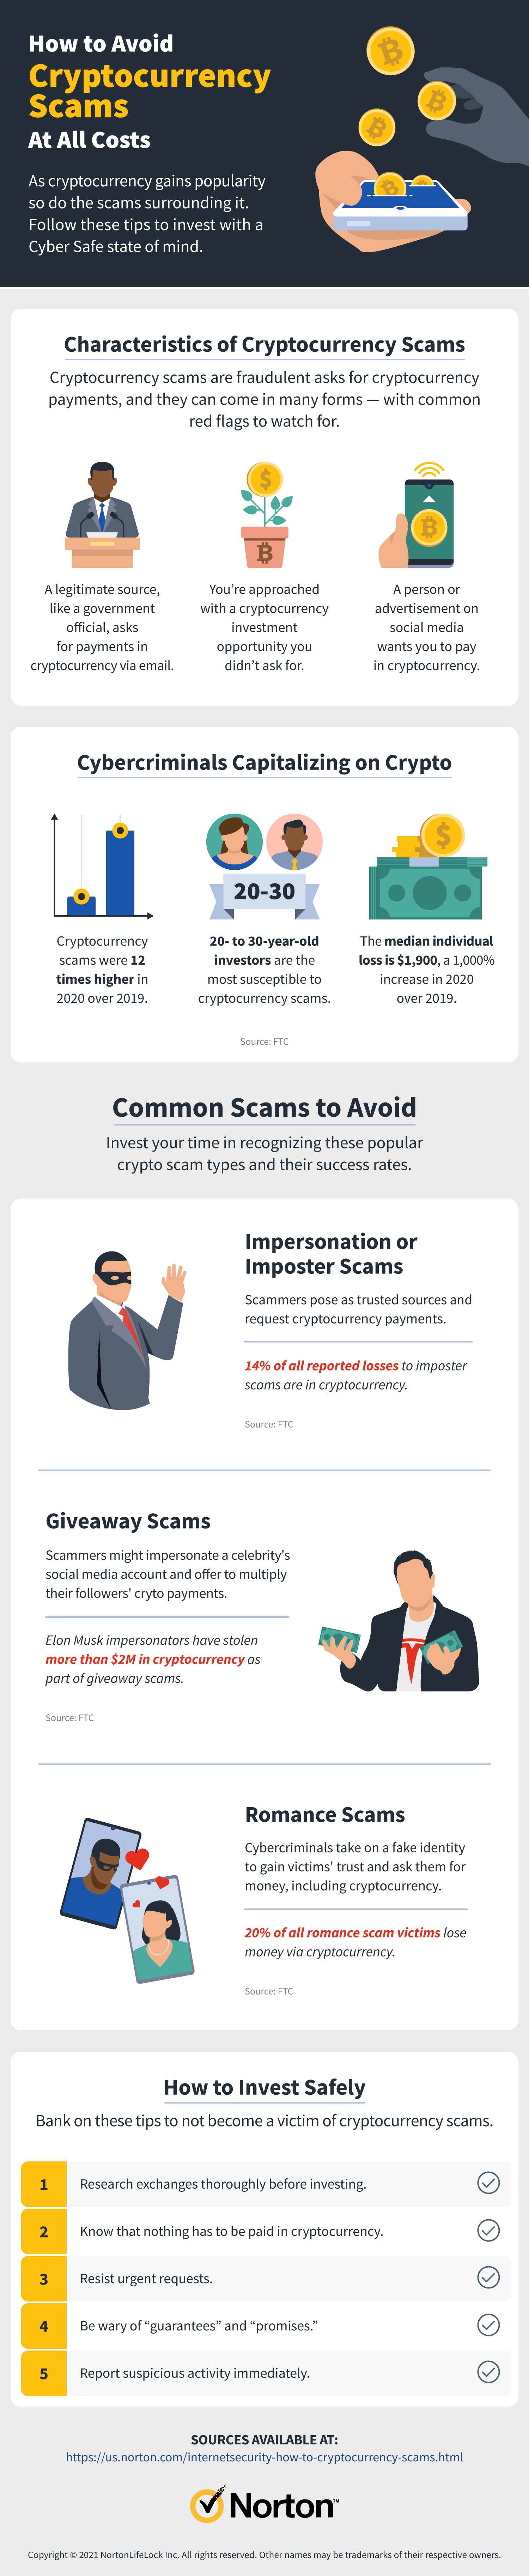 an infographic, courtesy of Norton, overviews the most common cryptocurrency scams to avoid in 2021 and beyond